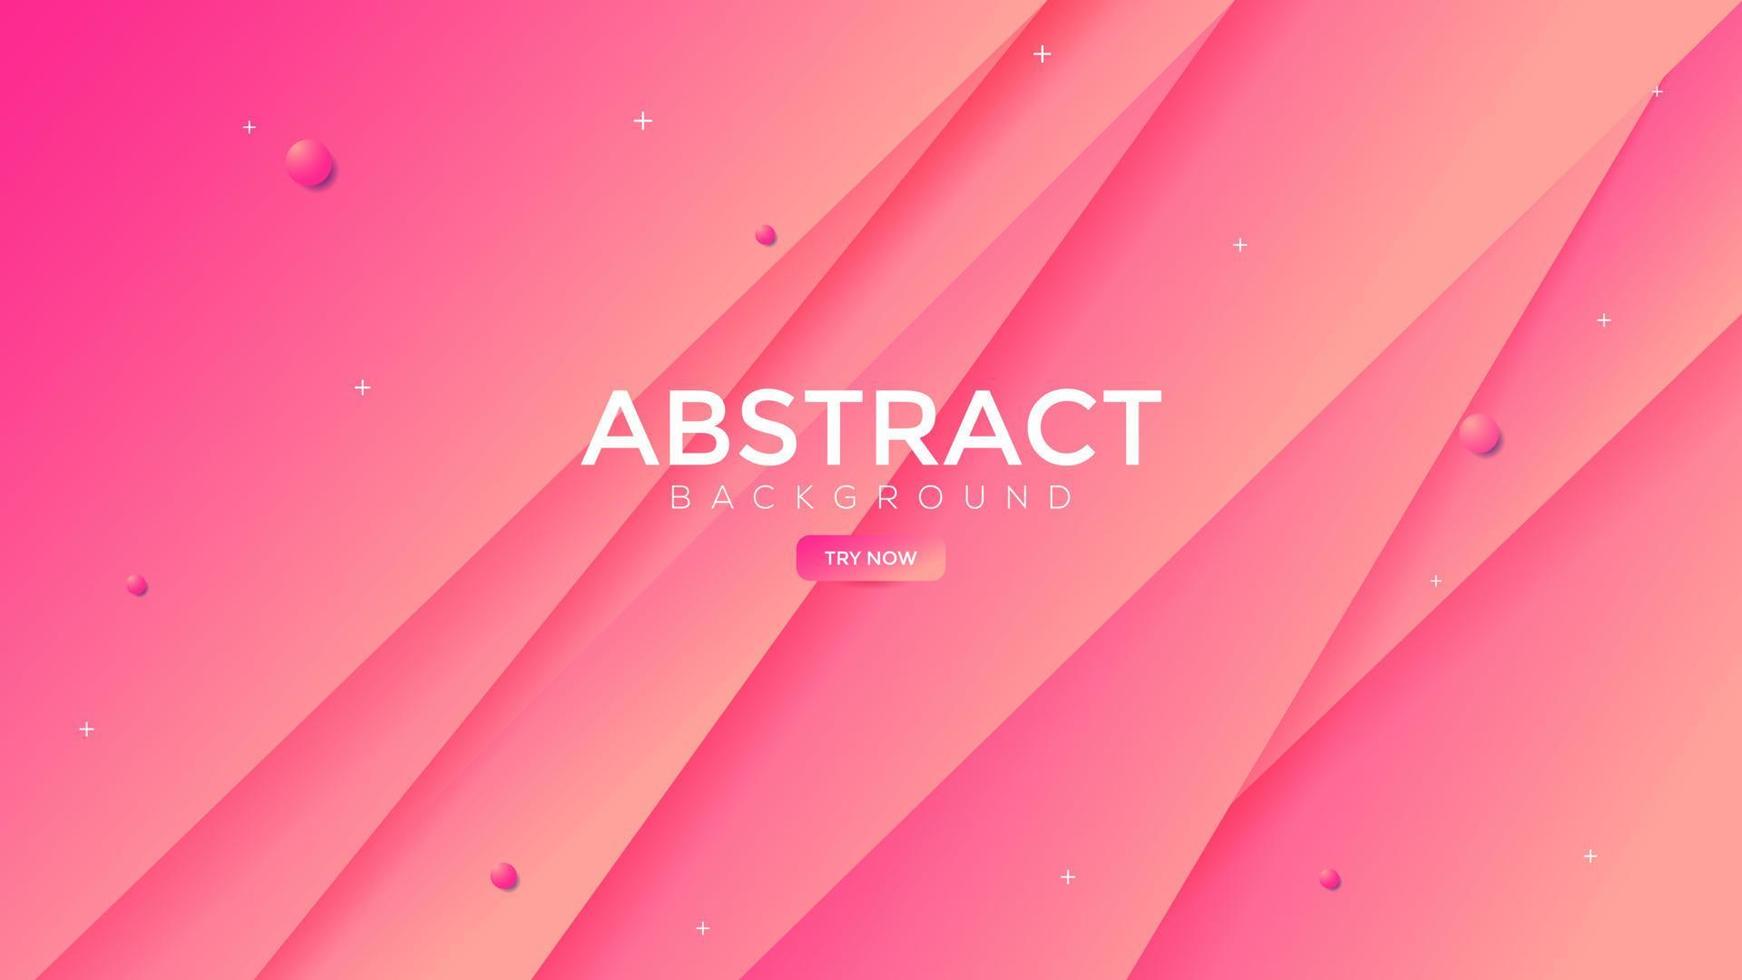 Vector abstract background with soft gradient color and dynamic shadow on background. Vector background for wallpaper. Eps 10